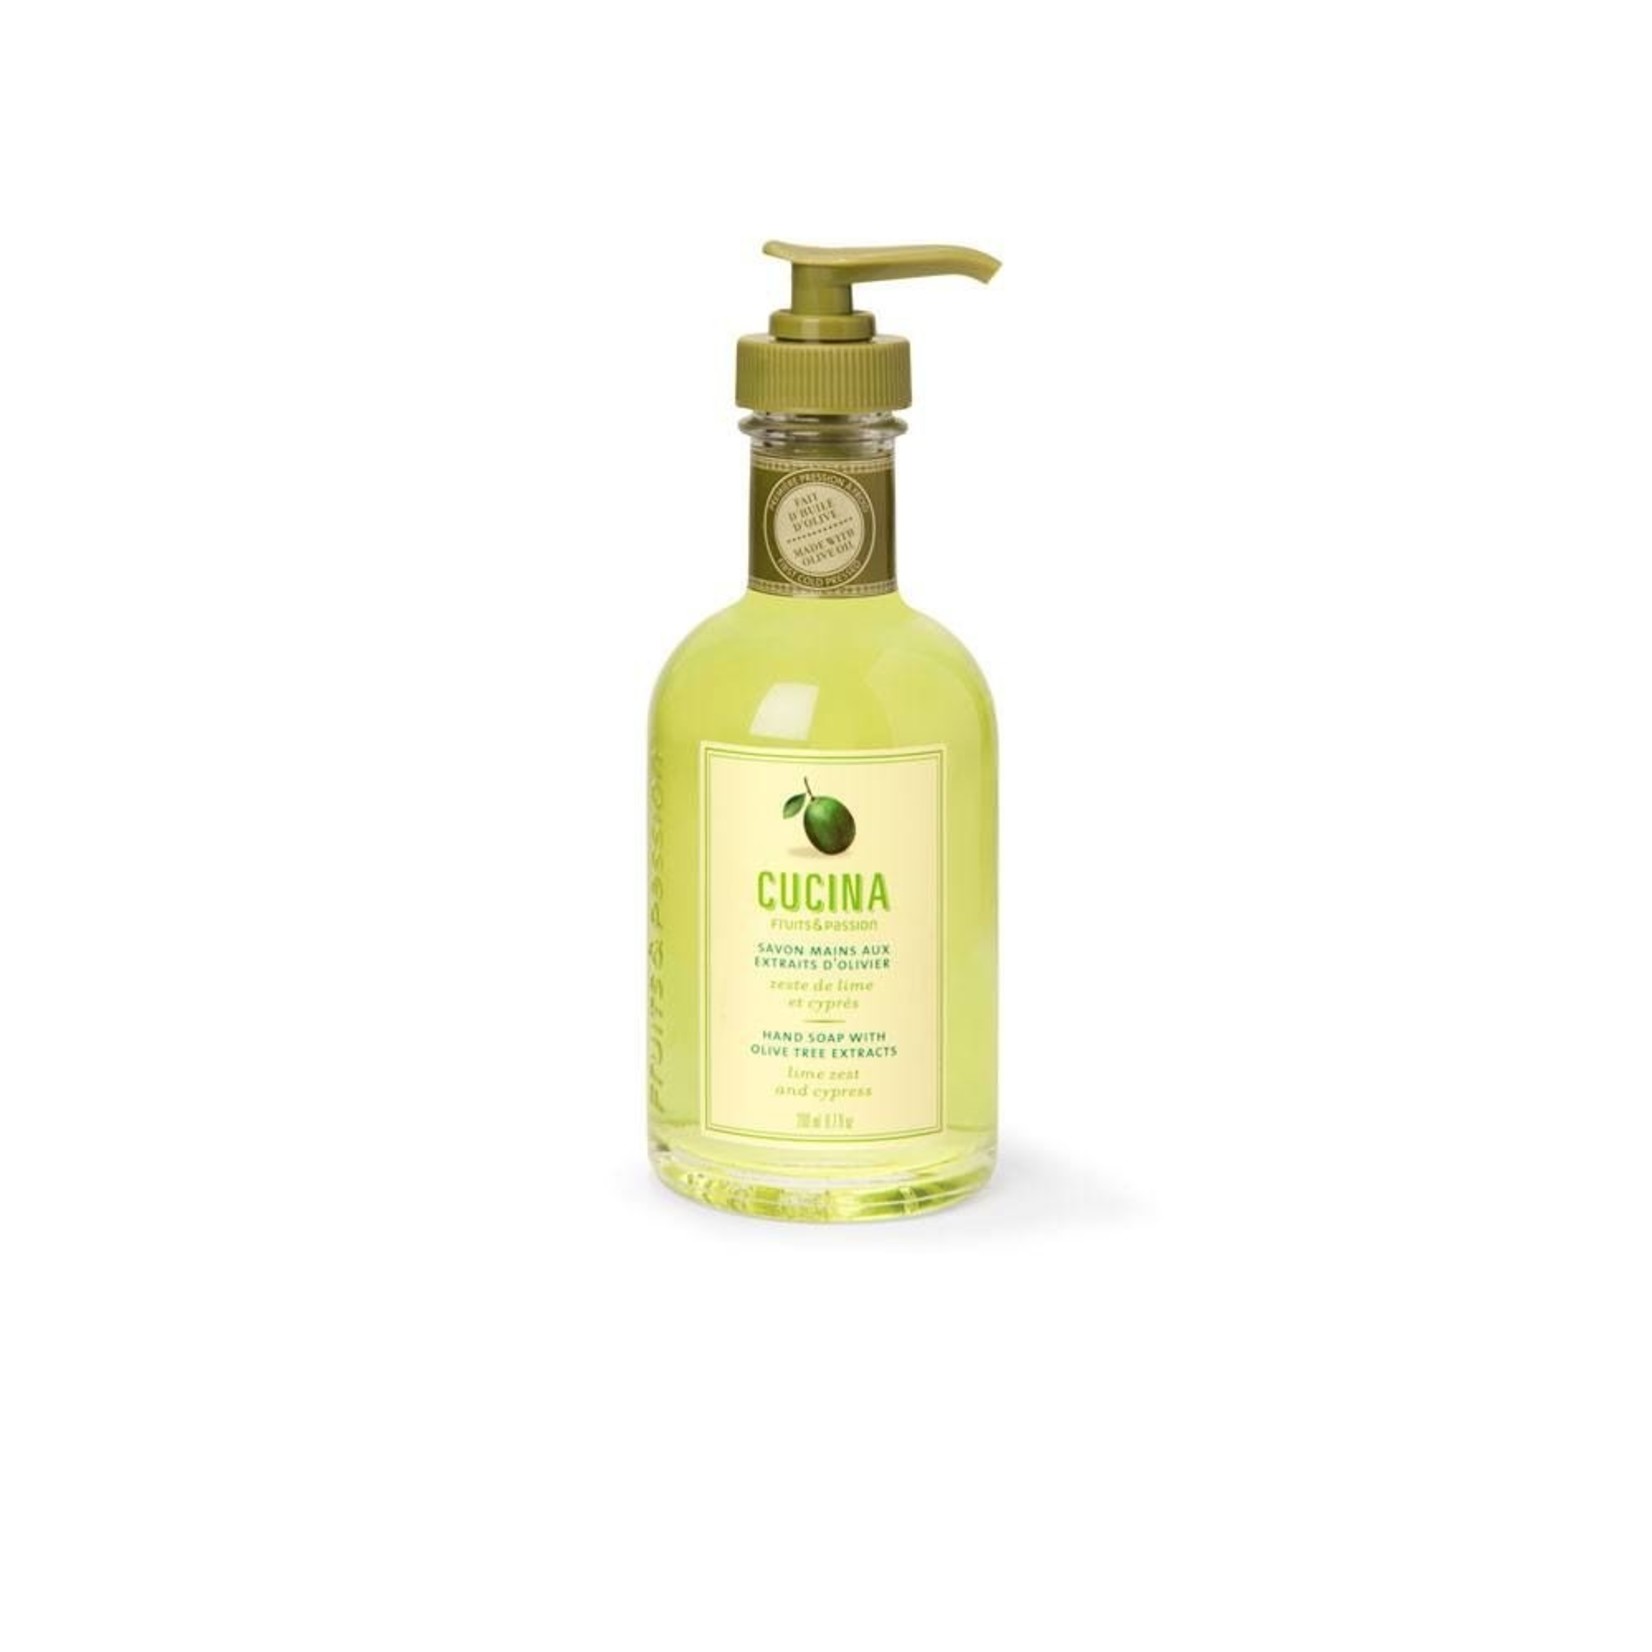 Cucina Hand Soap with Olive Oil - Lime Zest and Cypress